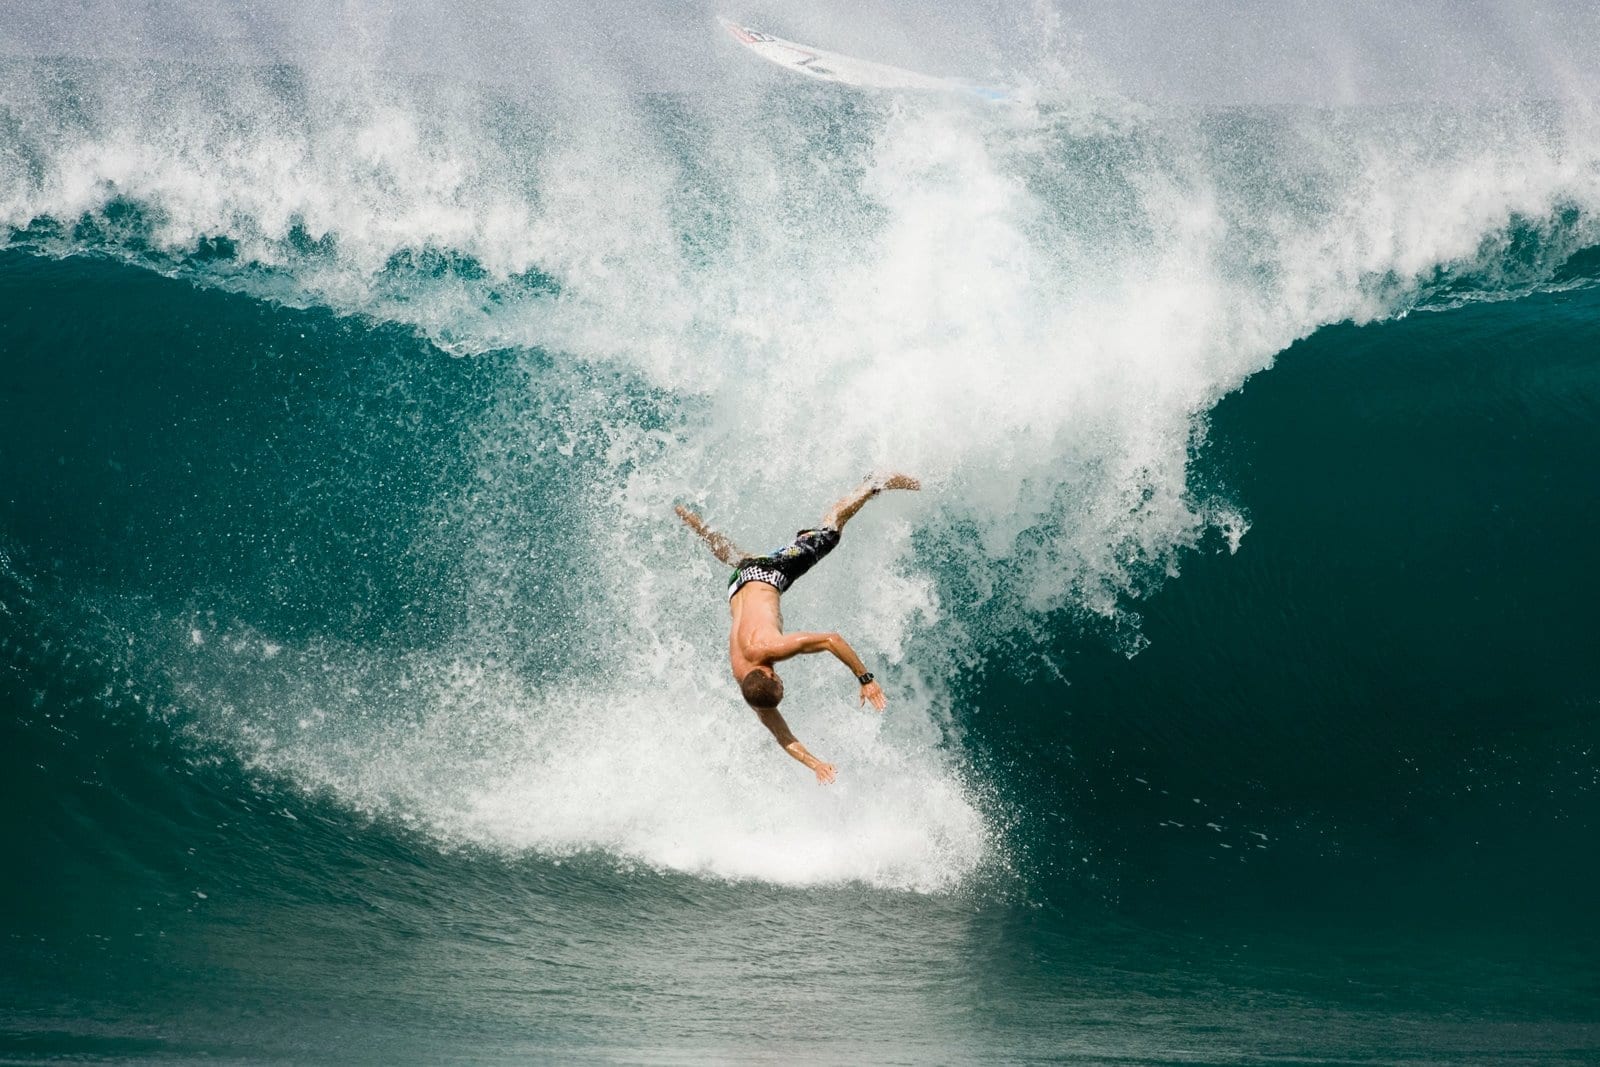 Stoke’s Favorite #kookslams (And How To Avoid Them)